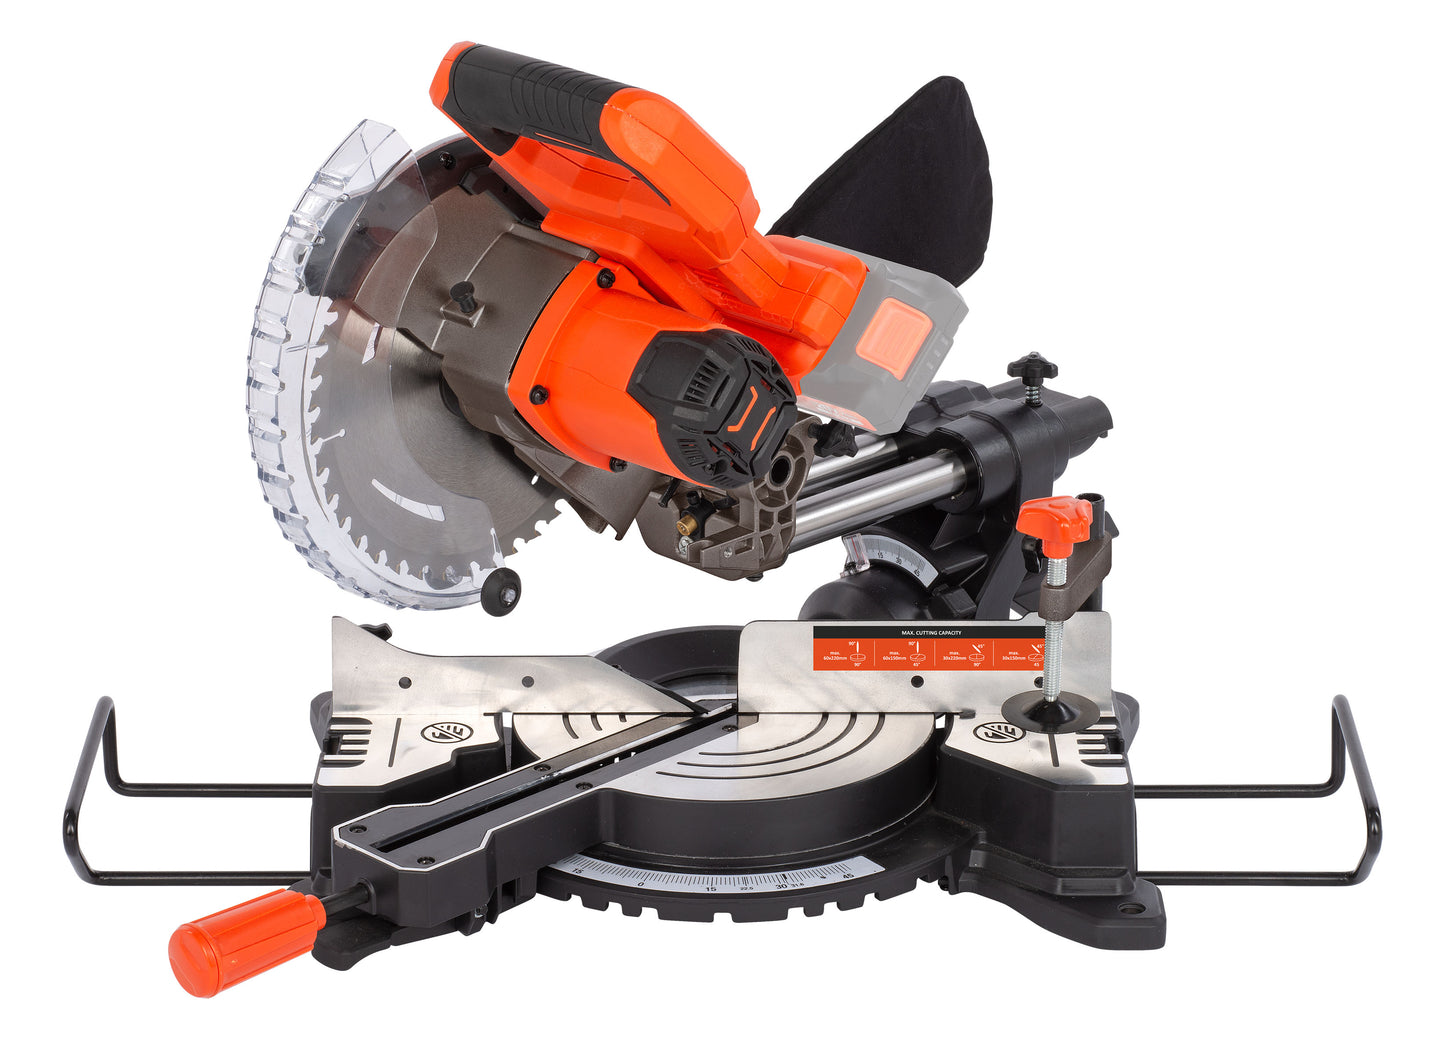 Dual Power - 20V Cordless Telescopic Mitre Saw - 60mm (unit only)